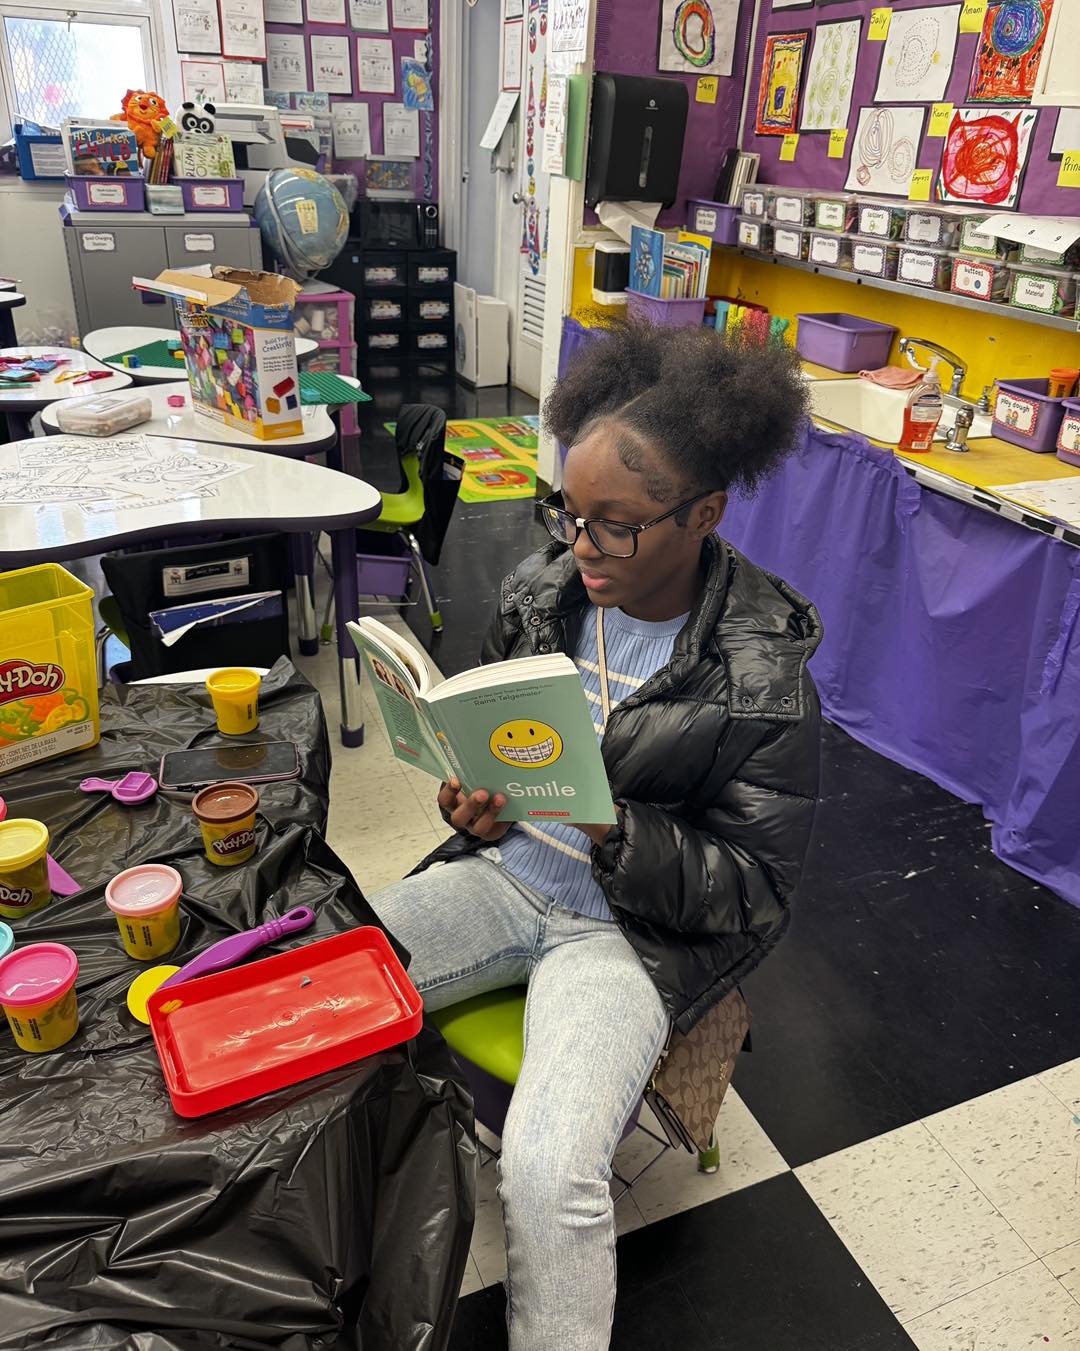 We love it when our patrons take boxes of books to book deserts. Kudos to Cecilia for her donations to PS 92 Mary McLeod Bethune school in Harlem